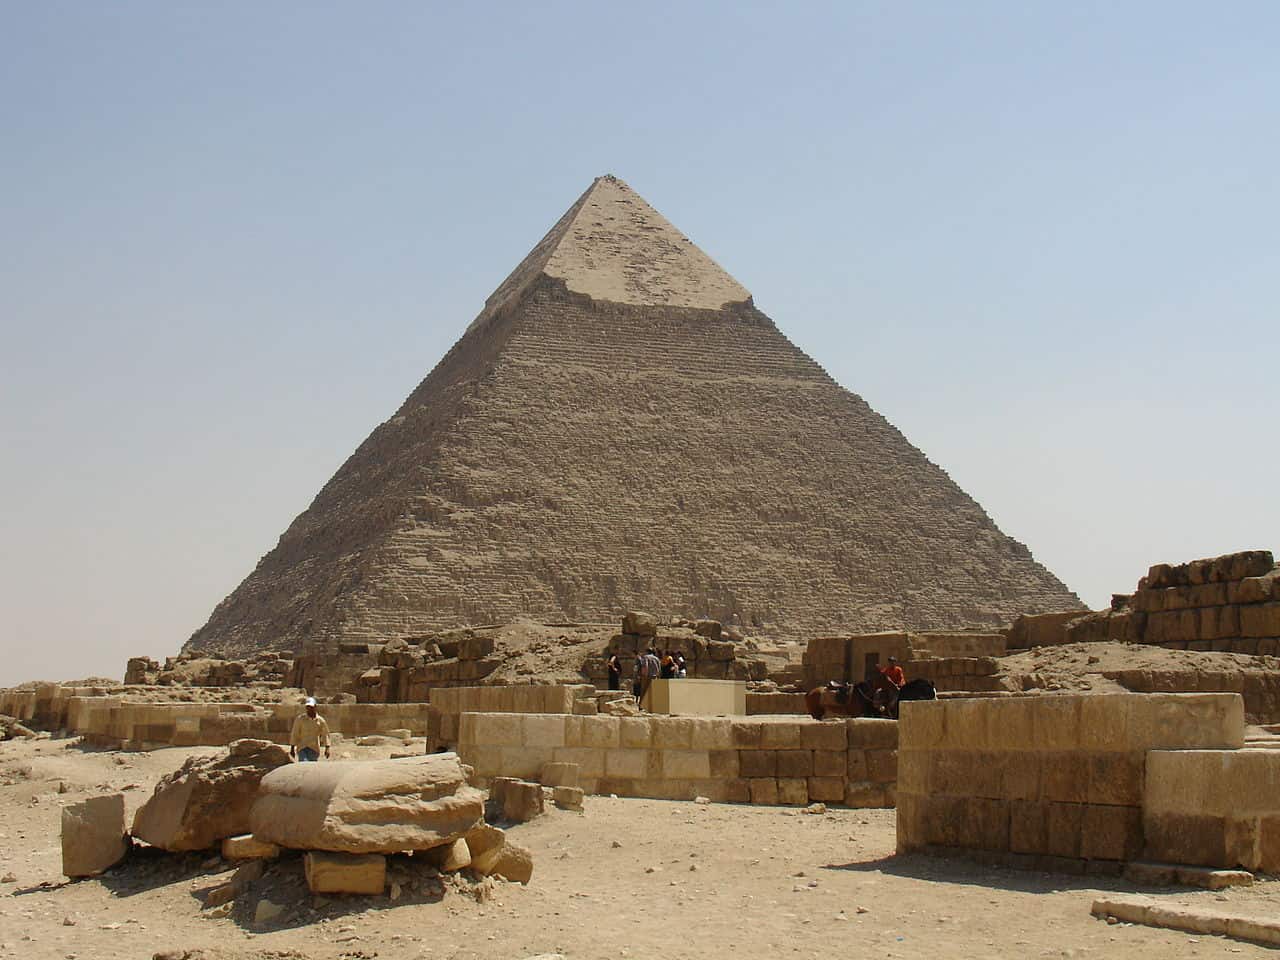 Khafres-Pyramid - Here Are 5 Of The Largest Pyramids On Earth